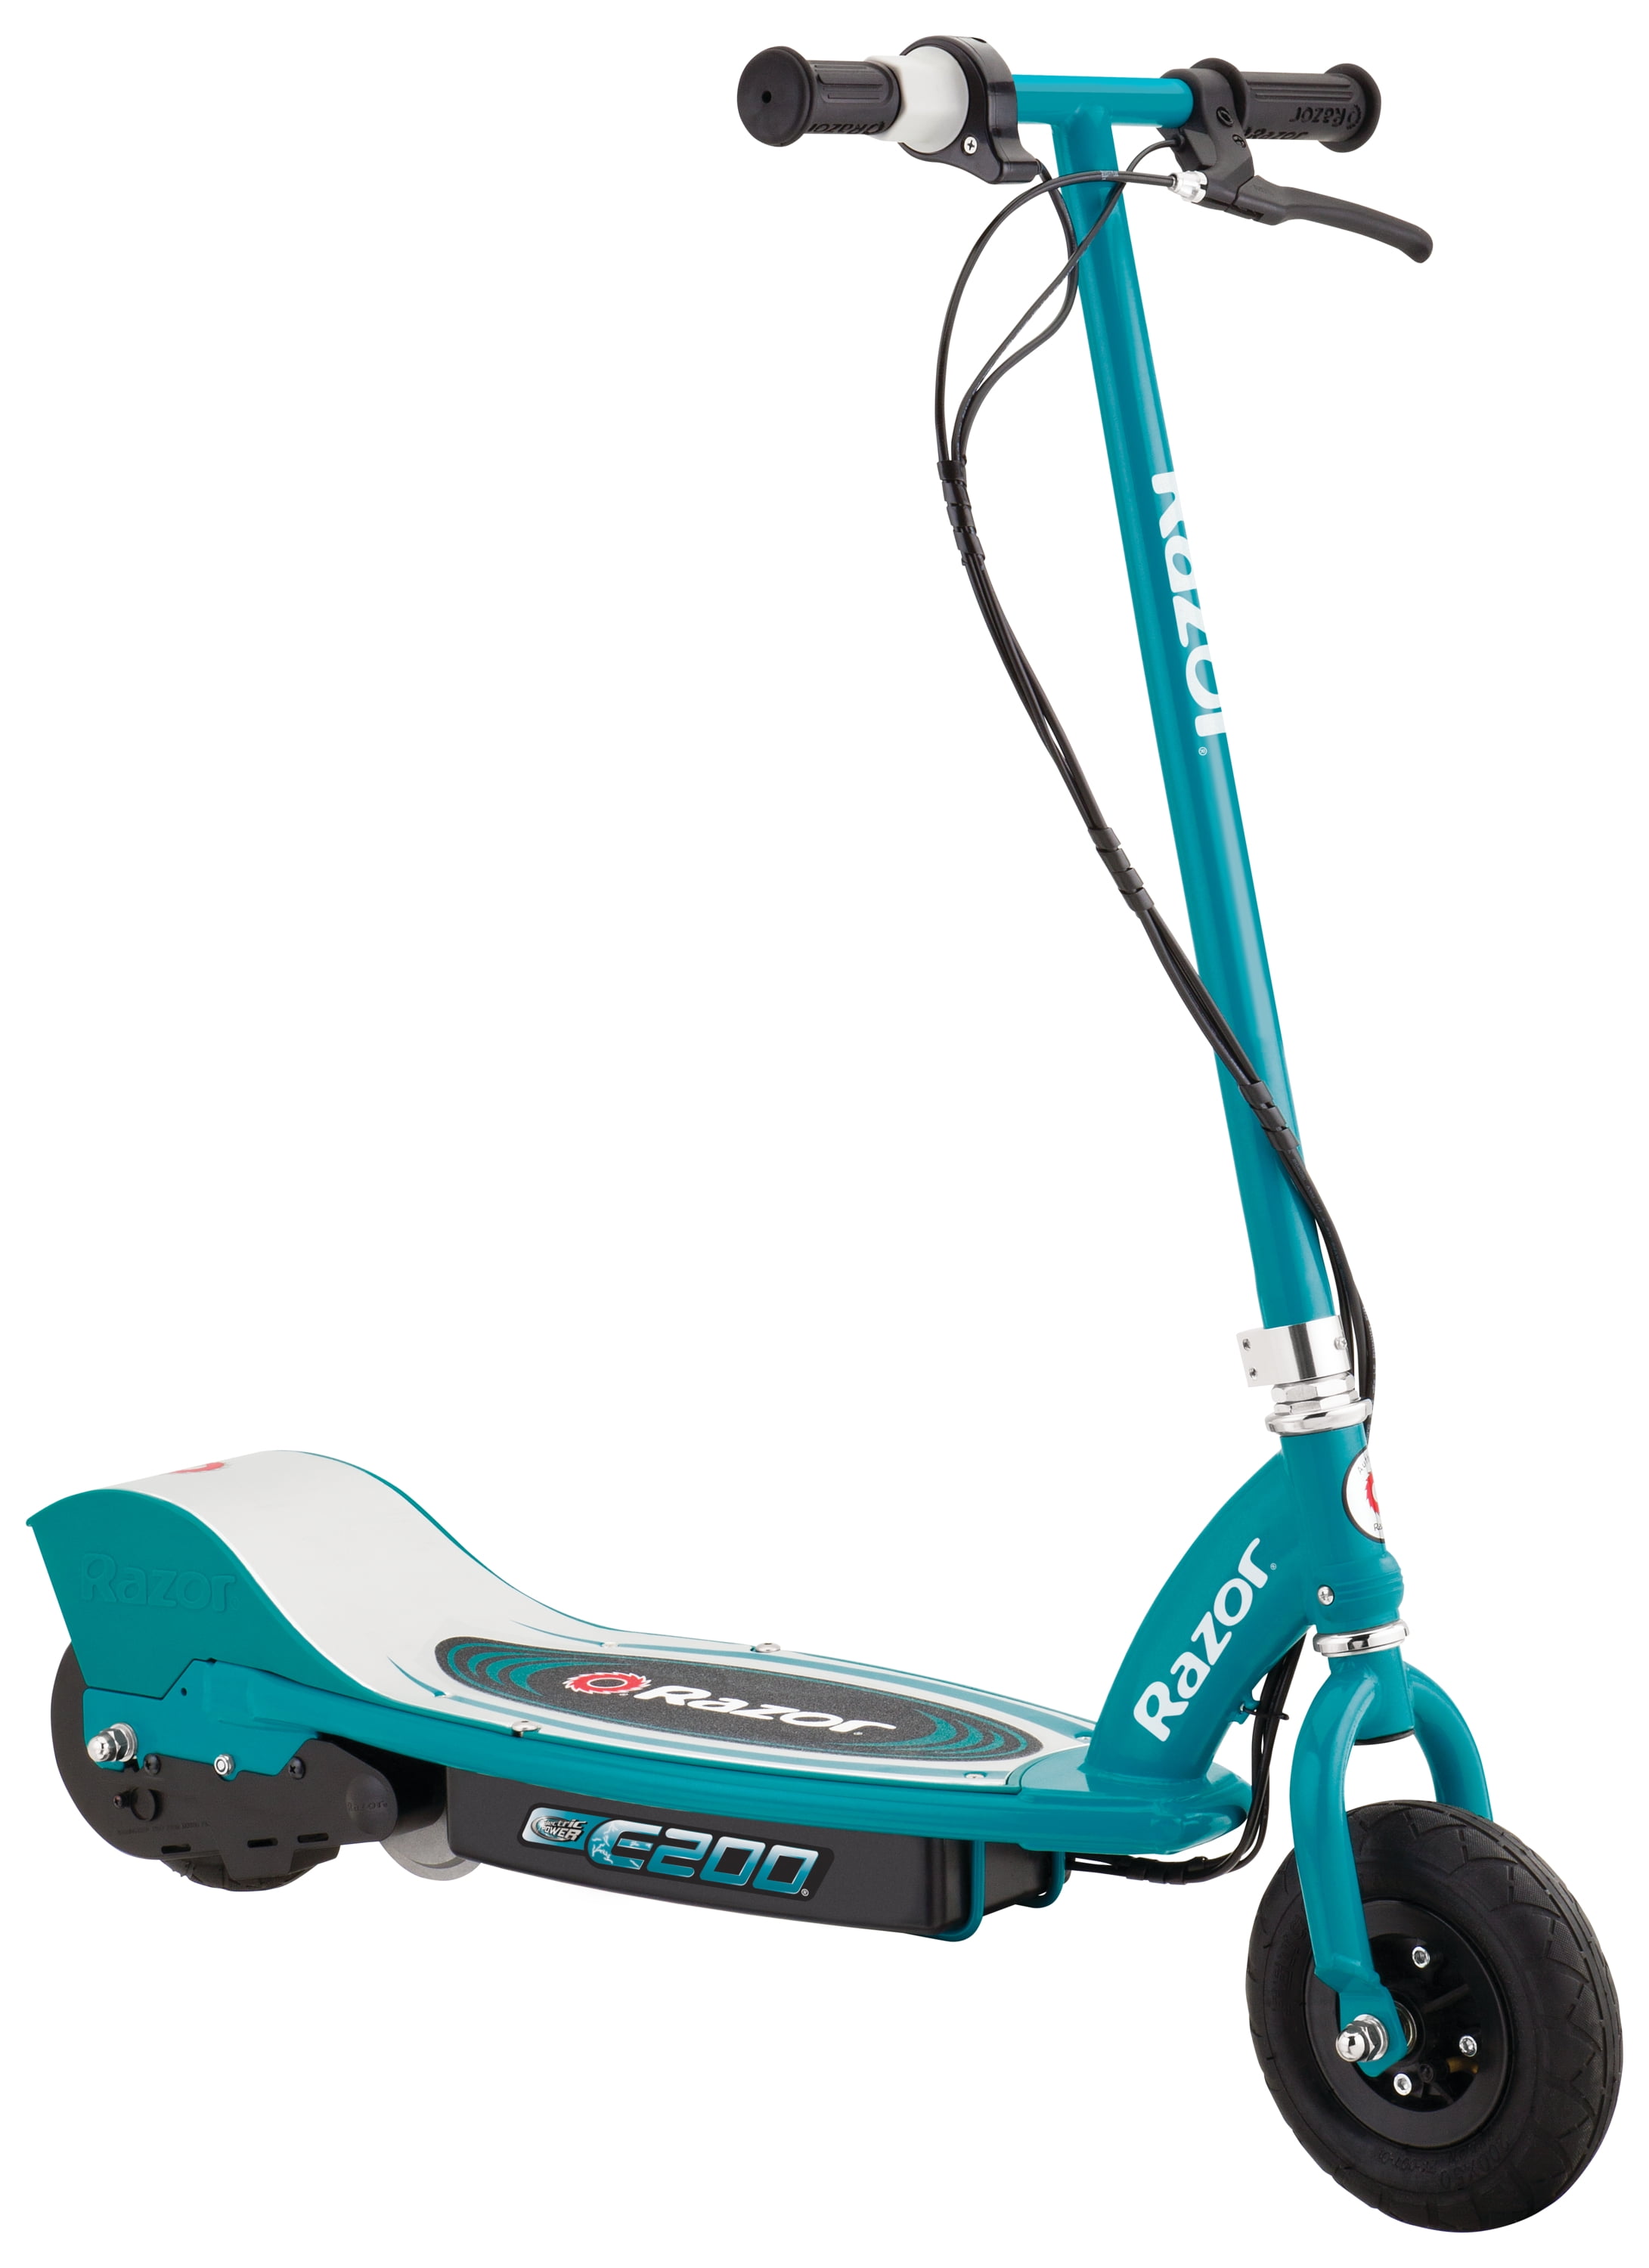 nudler klart forfader Razor E200 Electric Scooter - Teal, for Ages 13+ and up to 154+ lbs, 8"  Pneumatic Front Tire, 200W Chain Motor, Up to 12 mph & up to 8-mile Range,  24V Sealed